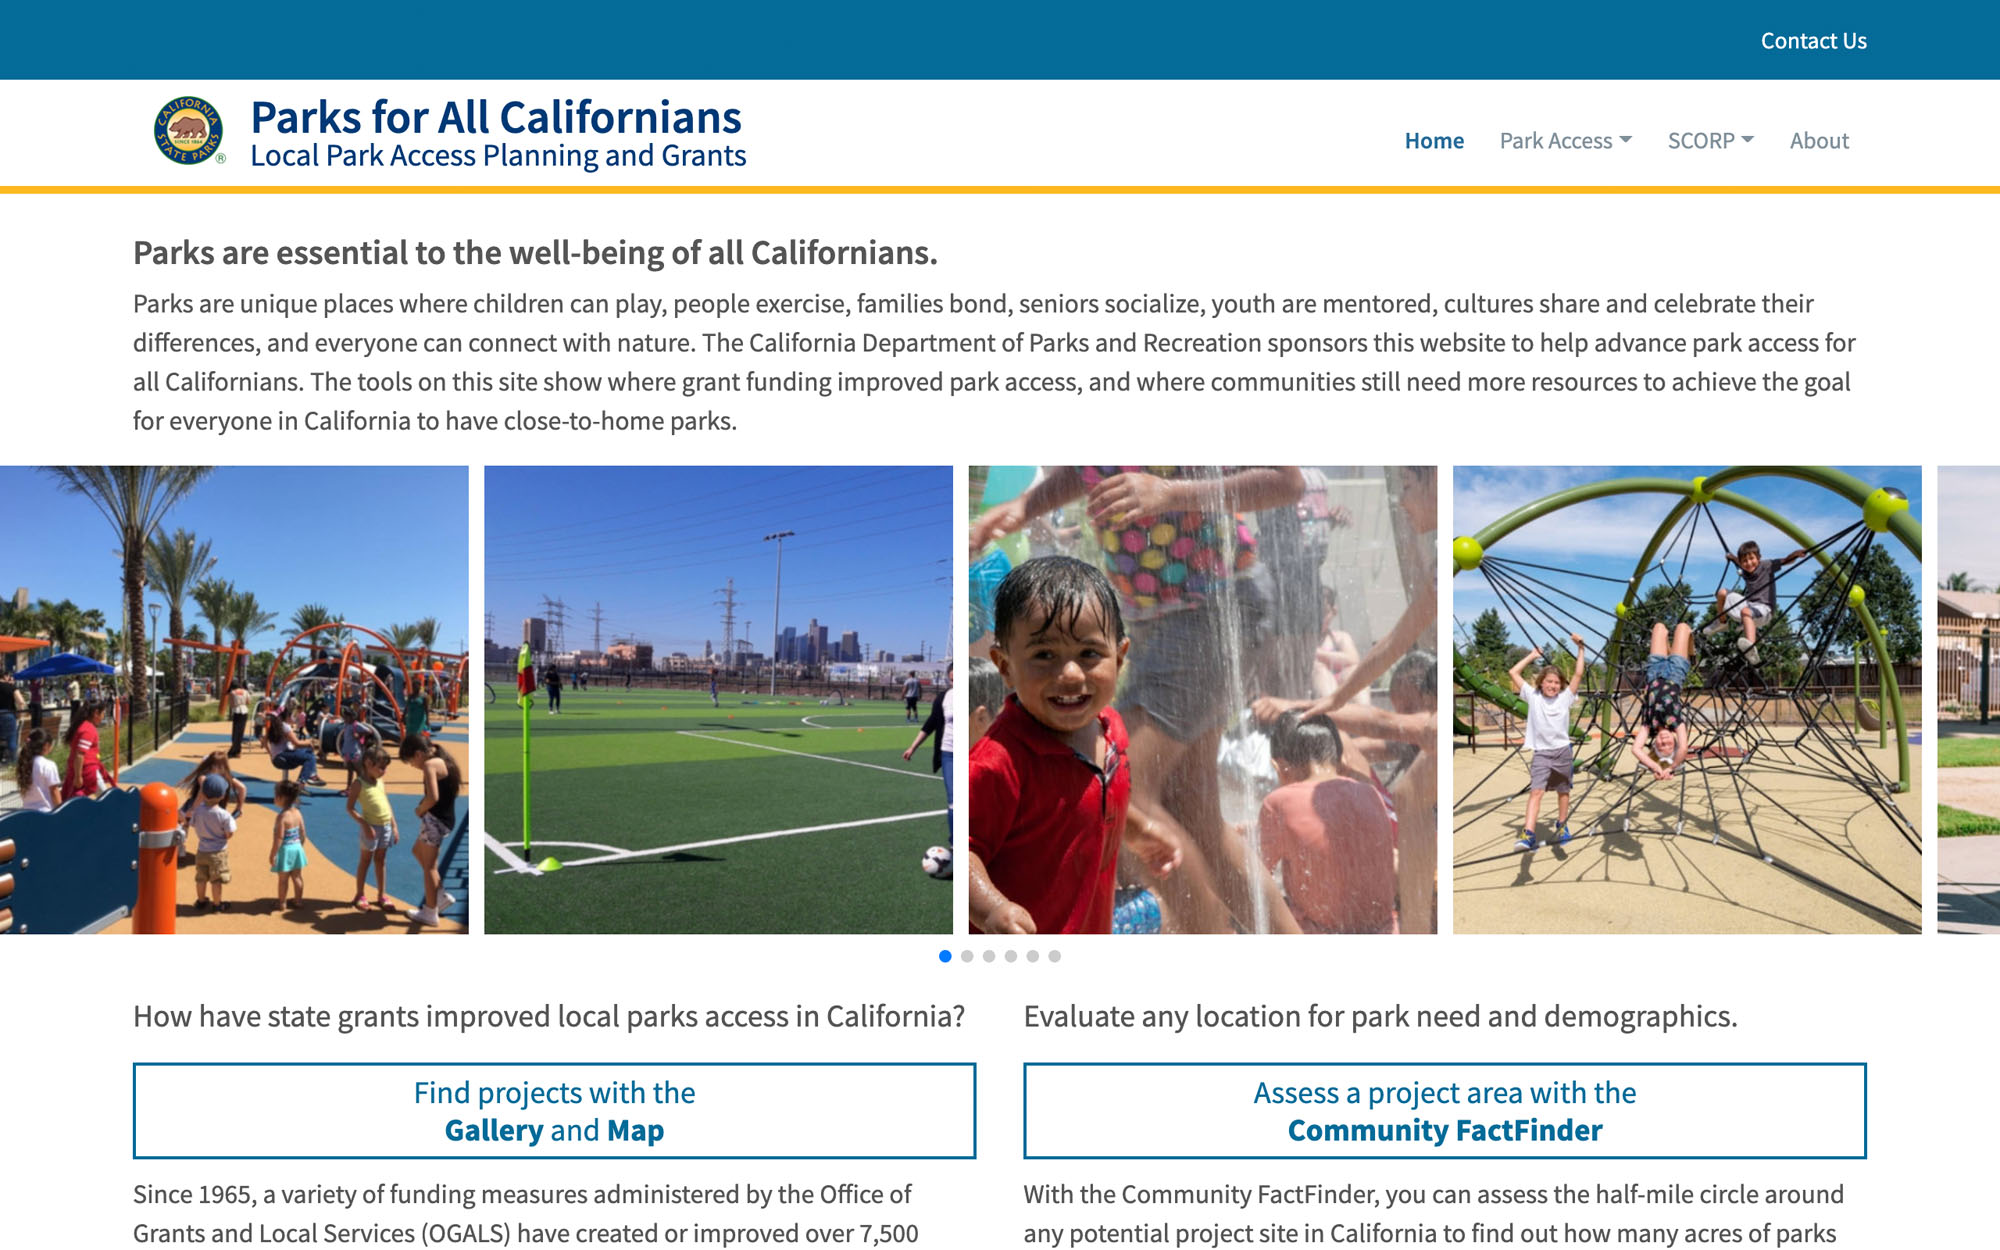 Parks for All Californians is a site to access all information about the SCORP